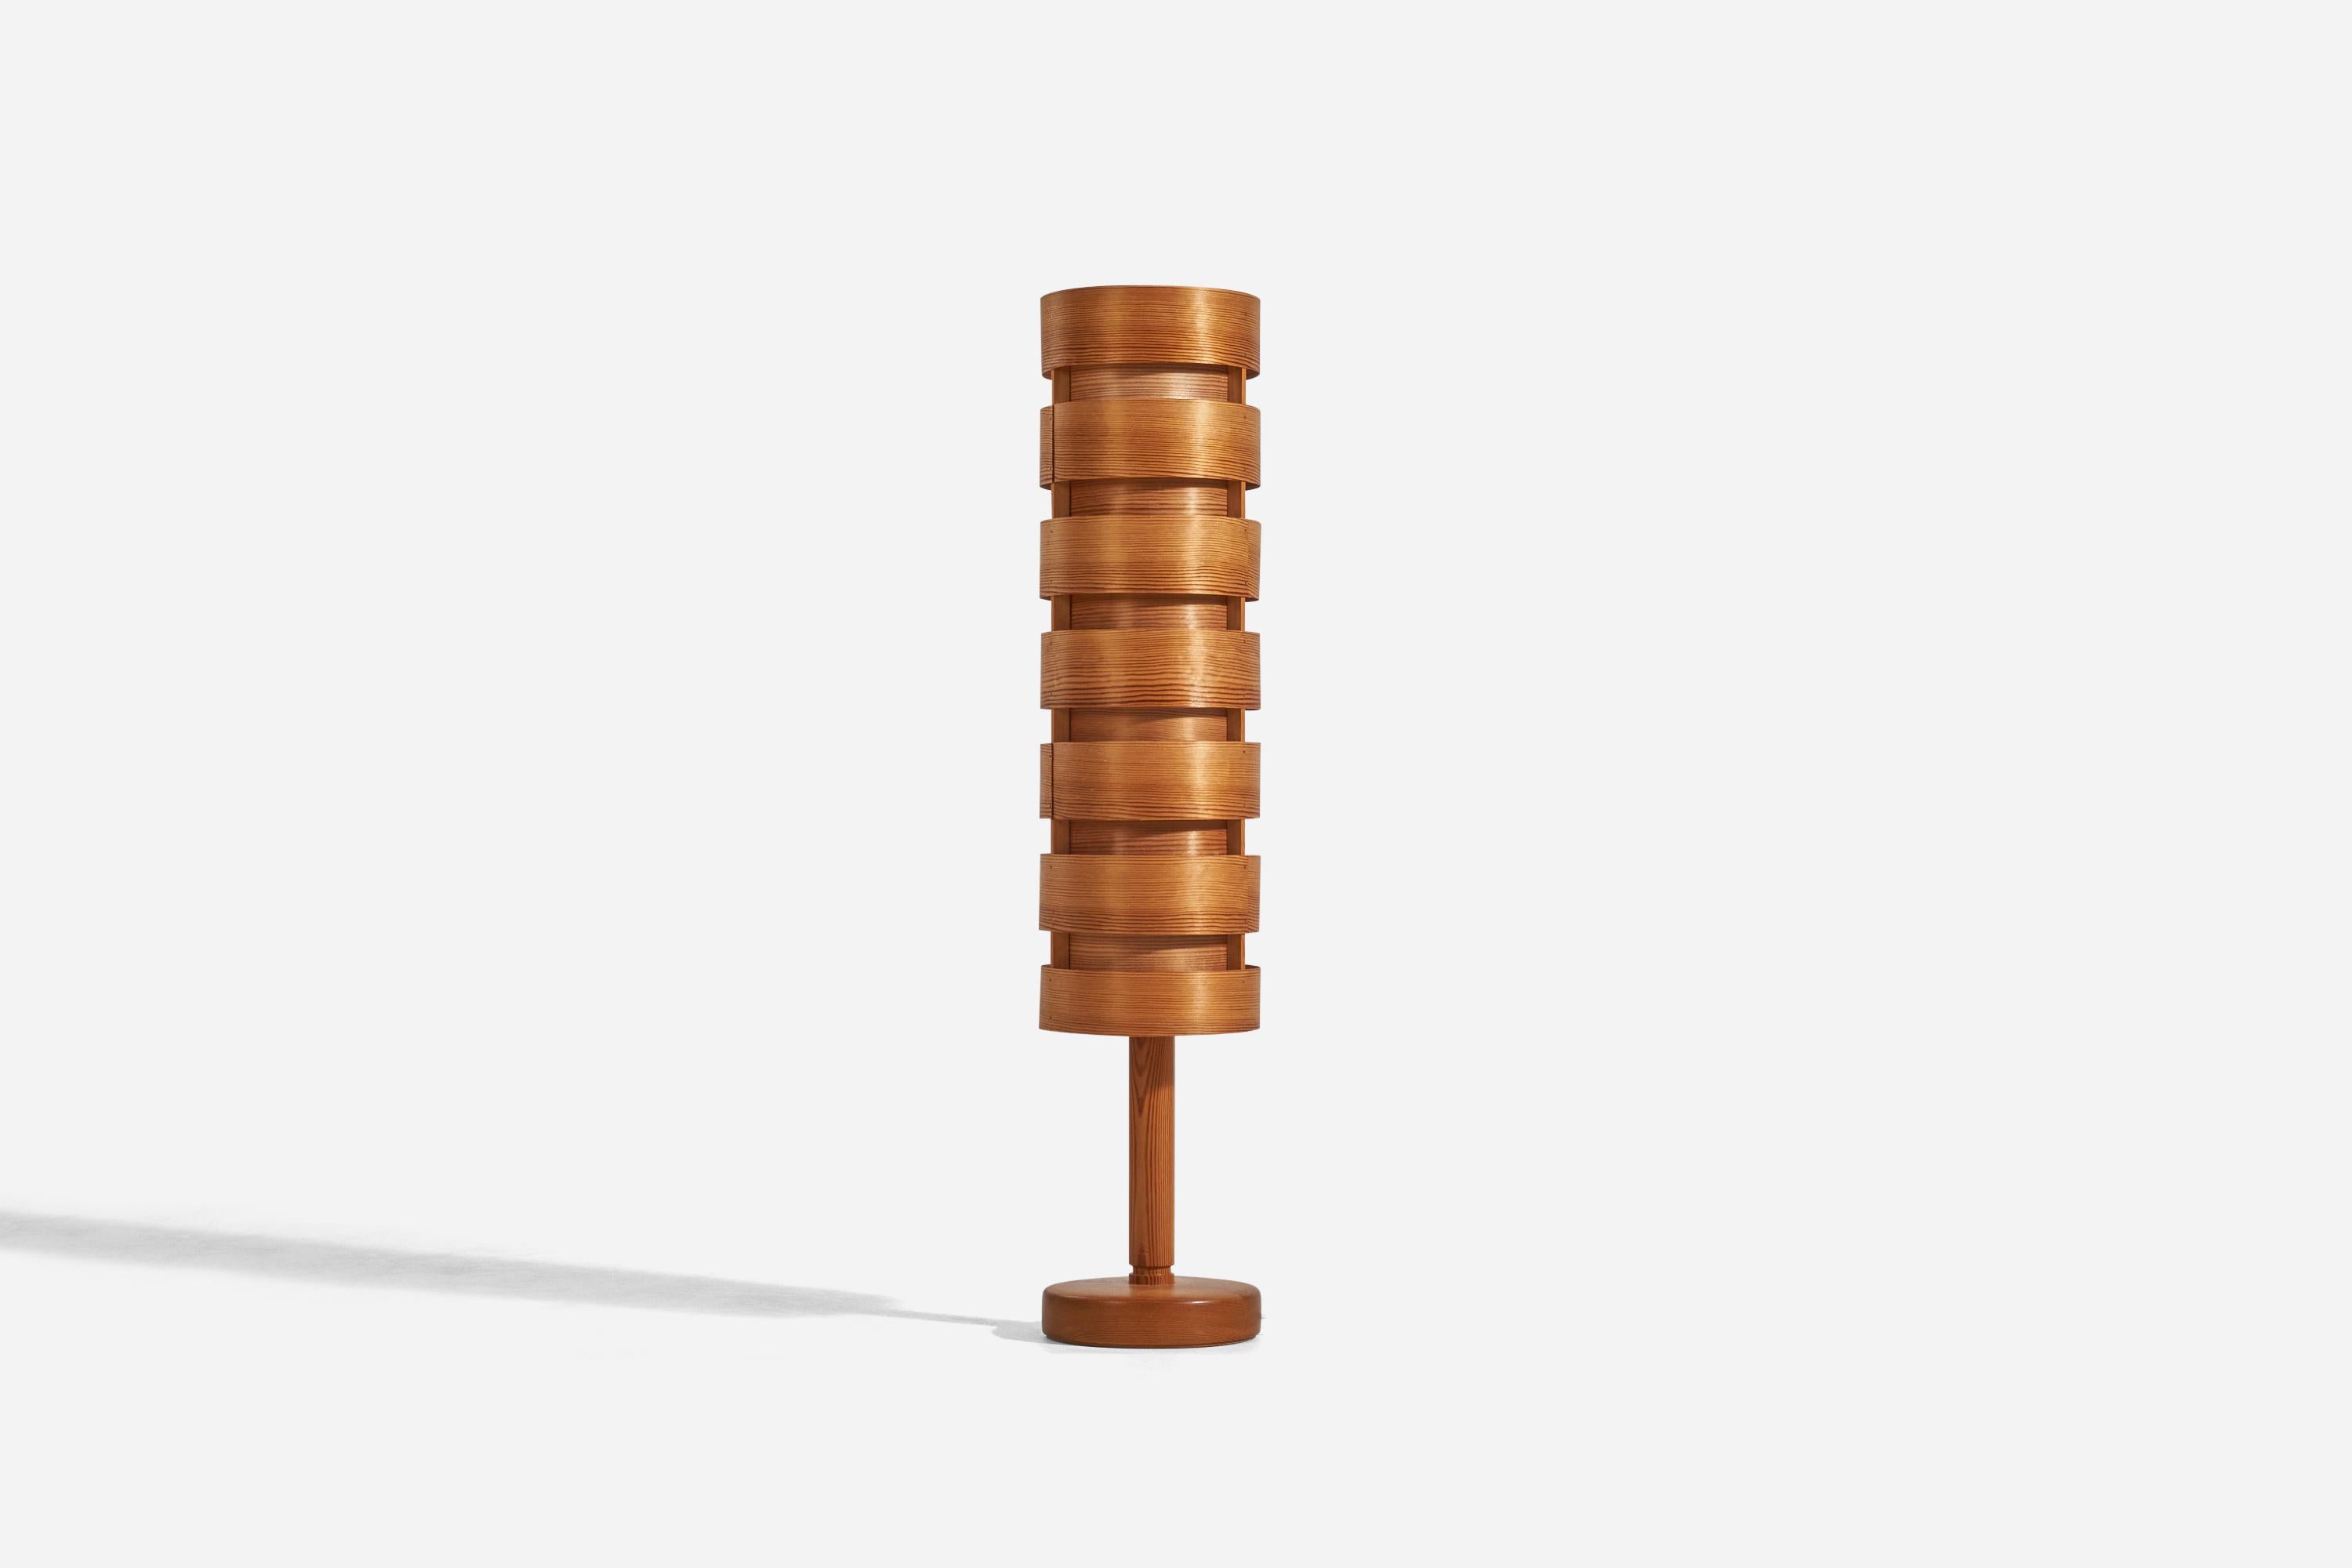 A pine and moulded pine veneer floor lamp designed by Hans-Agne Jakobsson and produced by his own firm in Markaryd, Sweden. c. 1970s.

Socket takes standard E-26 medium base bulb.

There is no maximum wattage stated on the fixture.